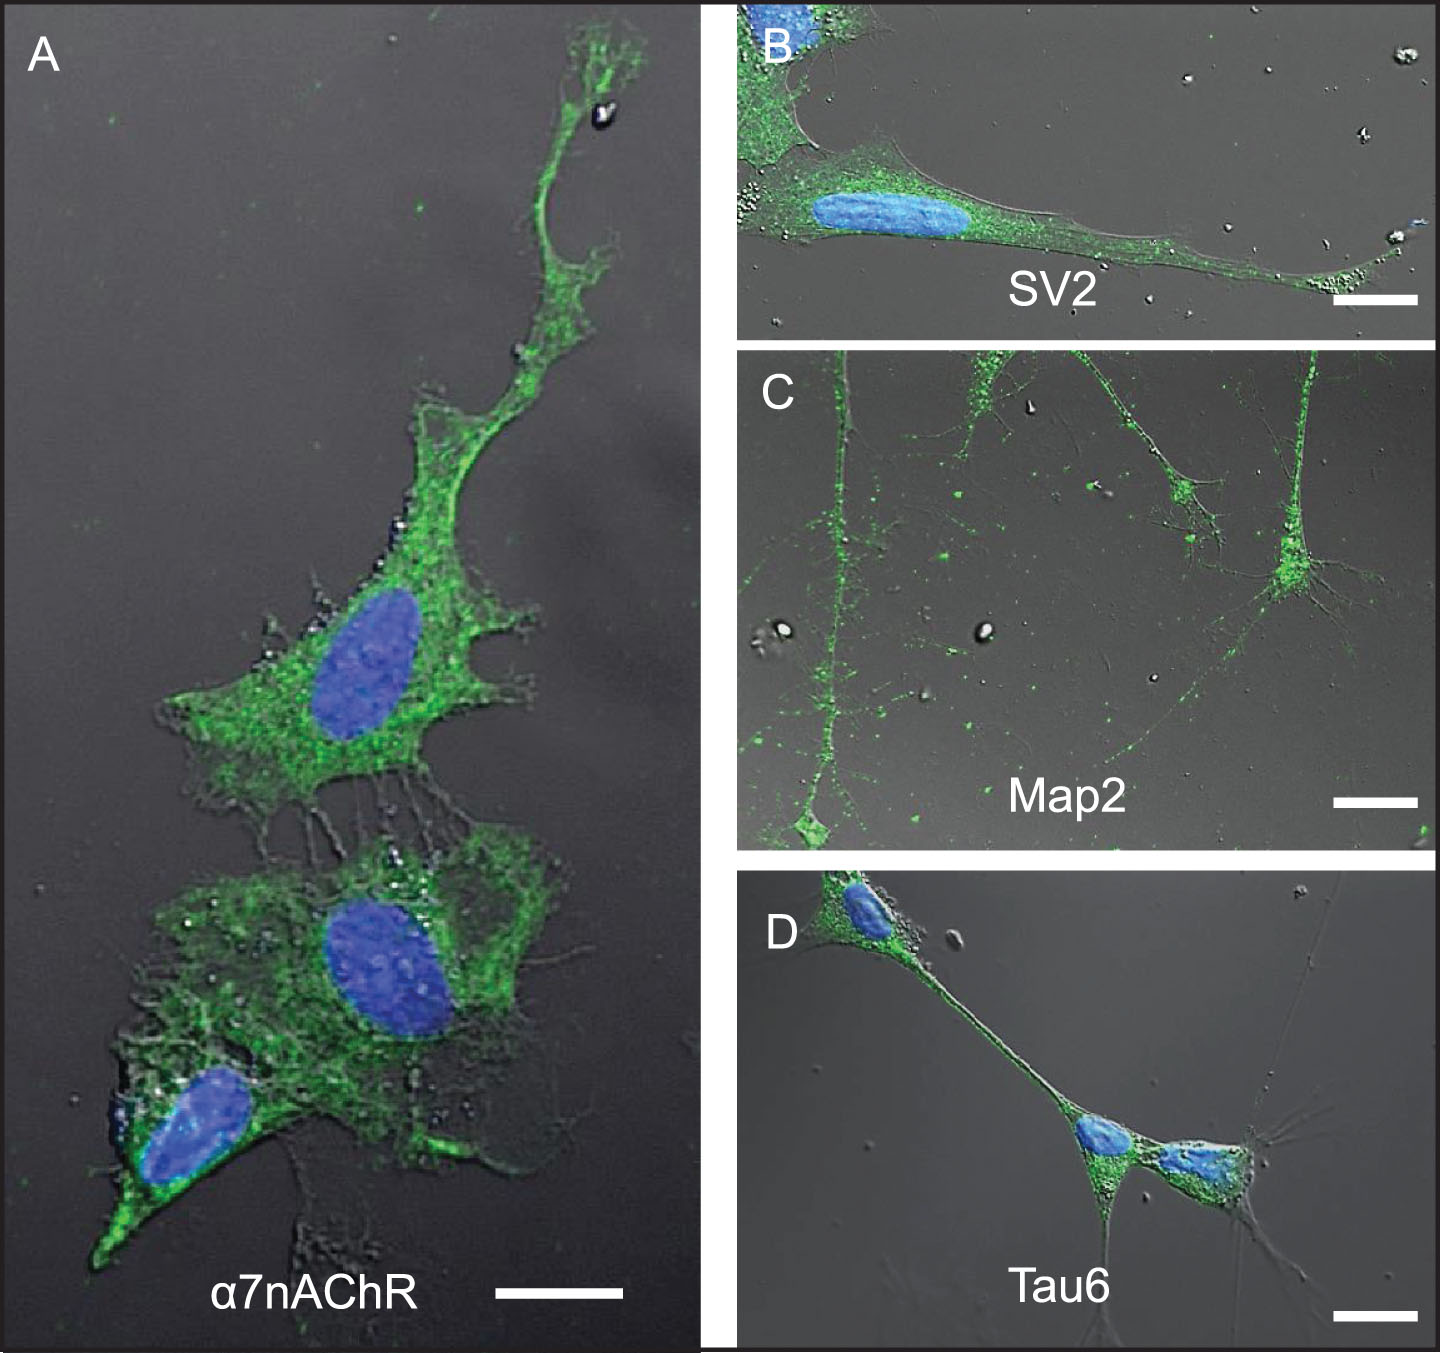 Differentiated SH-SY5Y cells are a useful model system to study mechanisms associated with neuronal Aβ42 internalization. SH-SY5Y cells differentiated by treatment with retinoic acid for 72-h. A-D) Differentiation was confirmed by changes in cell shape, extension of neuritic processes, and detection of robust expression of the following neuronal markers of differentiation using ICC: (A) α7nAChR; (B) synaptic vesicle 2a (SV2); (C) microtubule-associated protein 2 (Map-2); and (D) tau6. Scale bar = 5 μm.